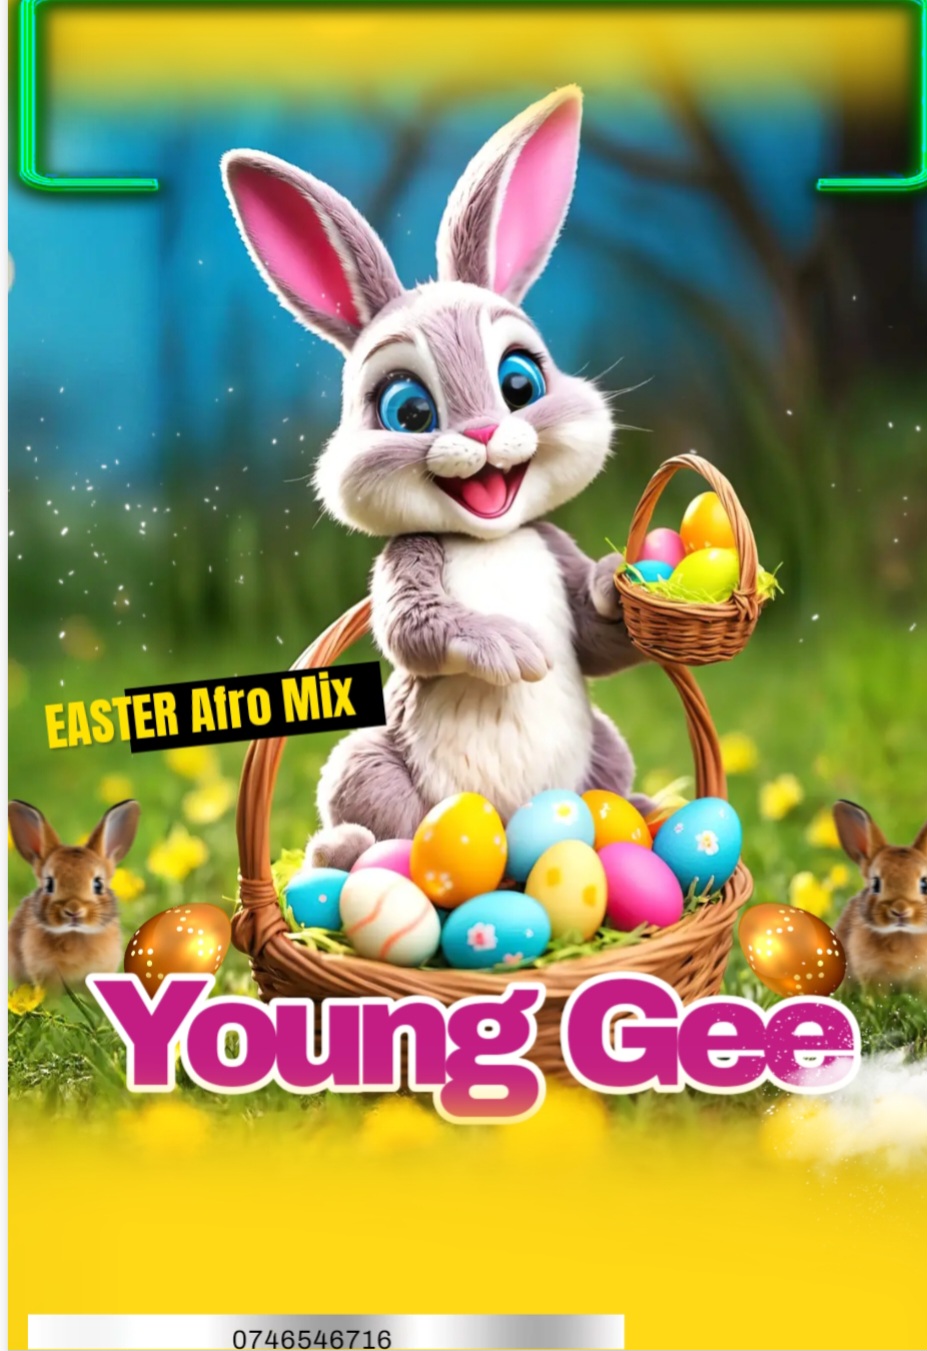 Easter(AfroMix) - Young Gee